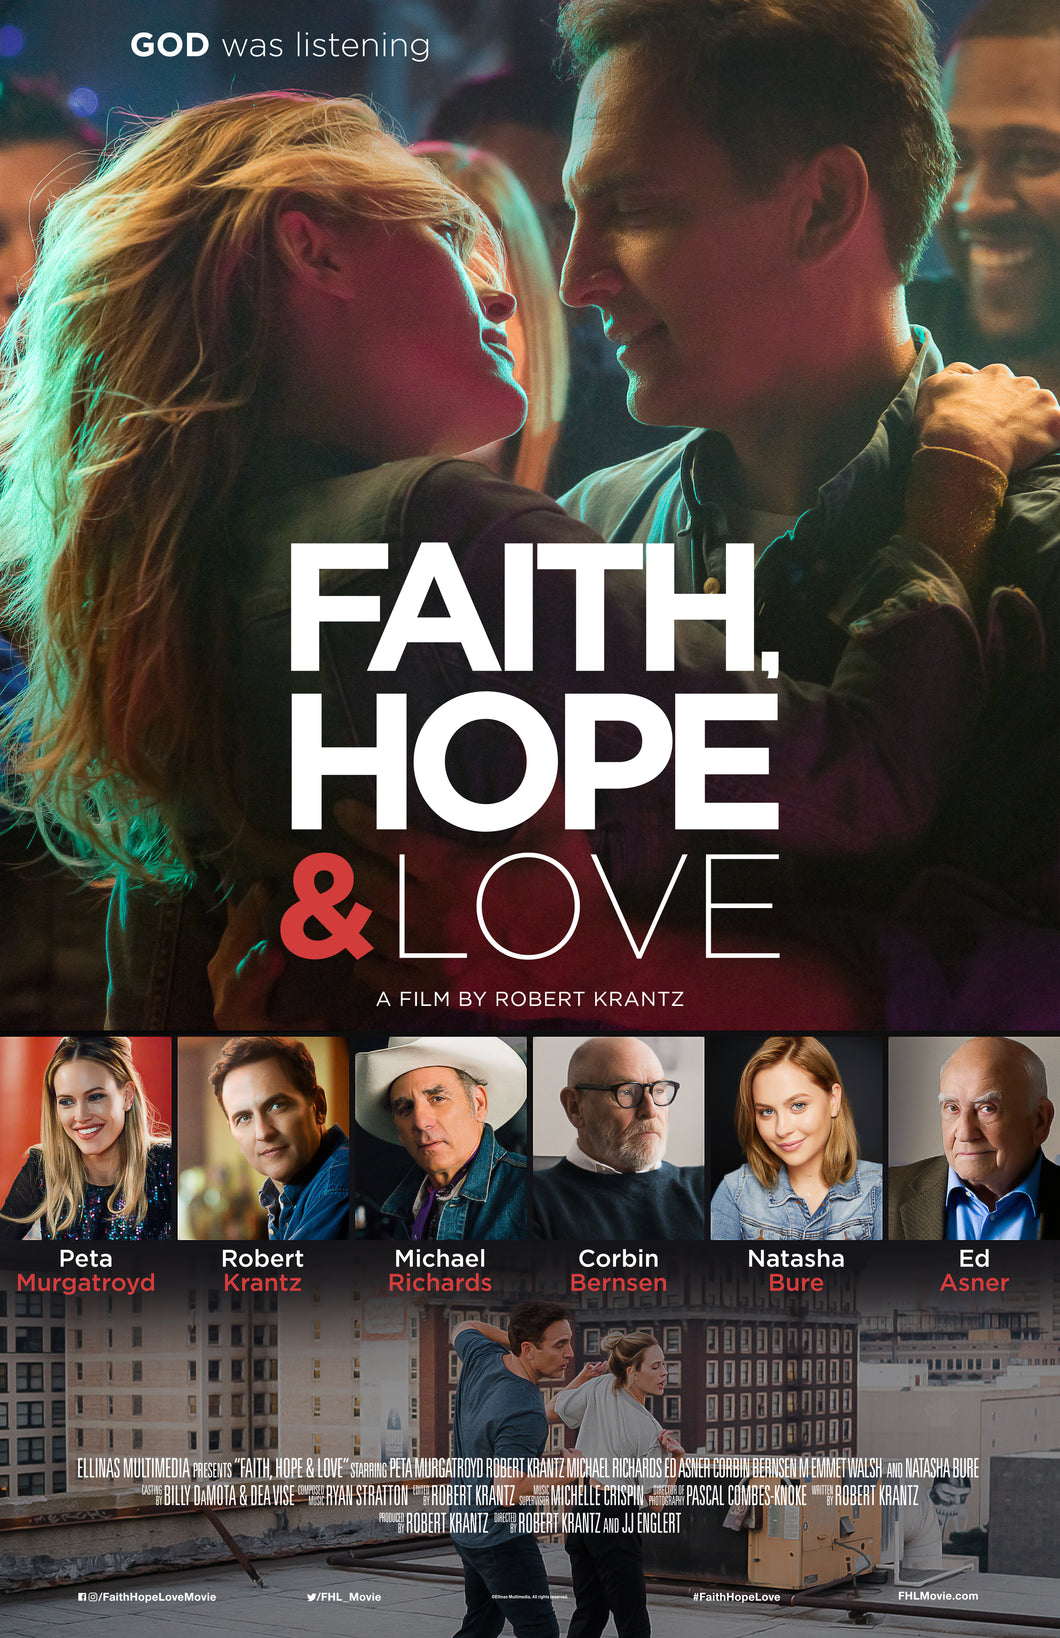 Faith, Hope & Love - RENT and WATCH IMMEDIATELY!